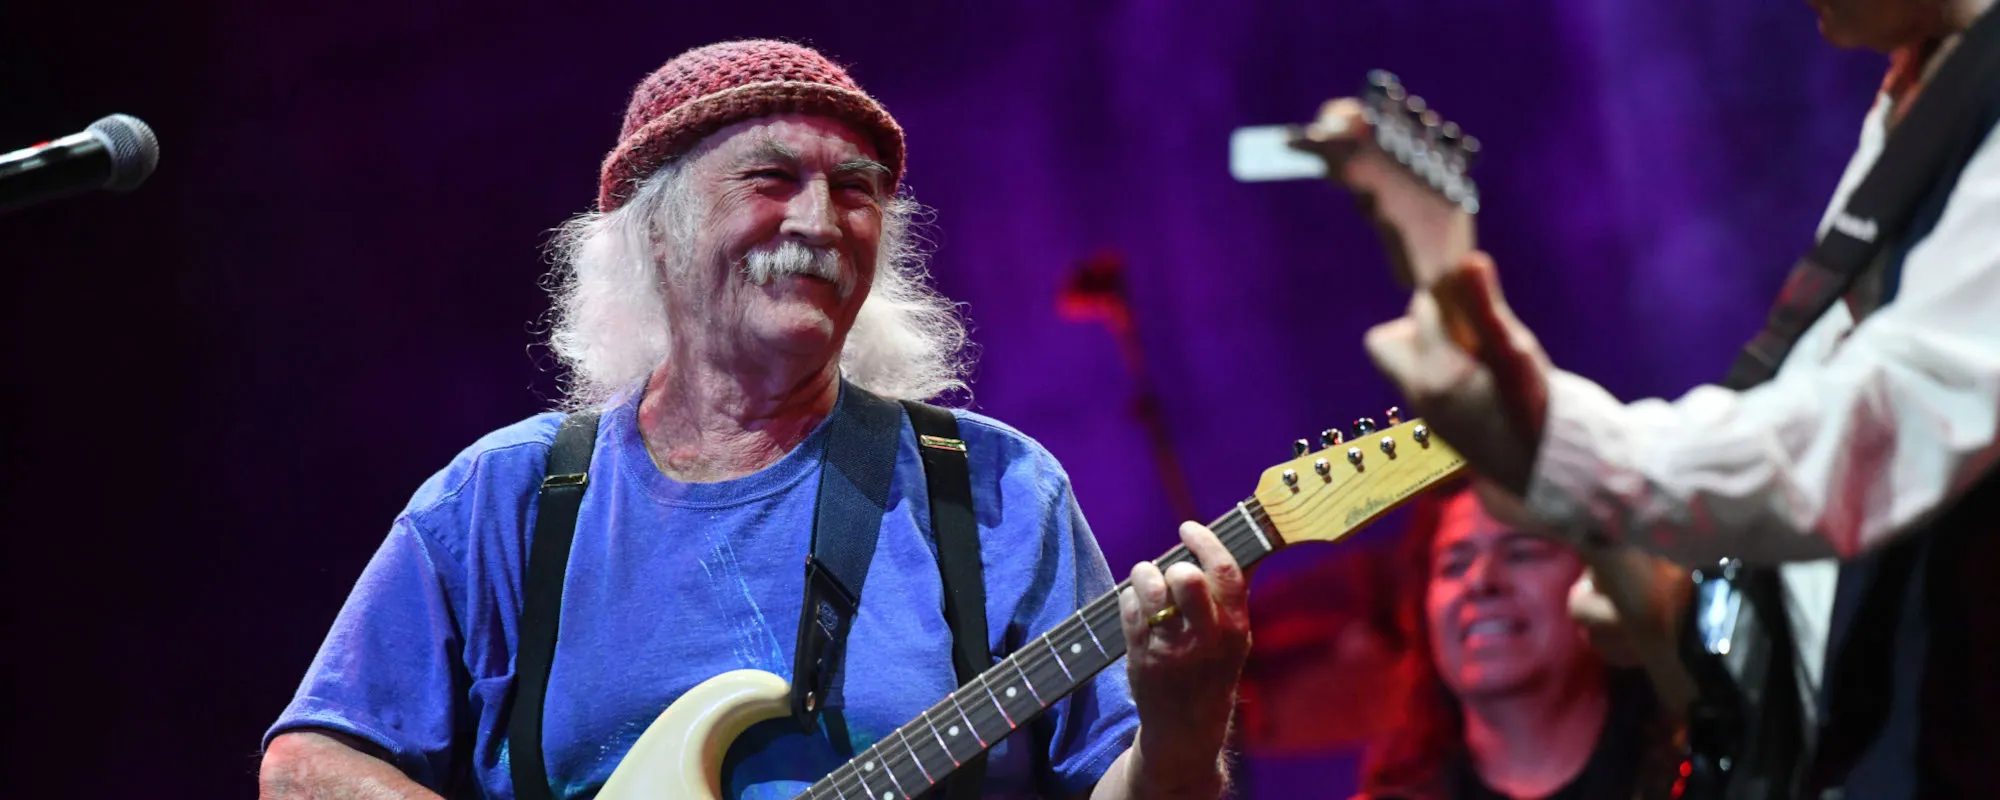 15 Legendary Albums You Didn’t Know Feature David Crosby